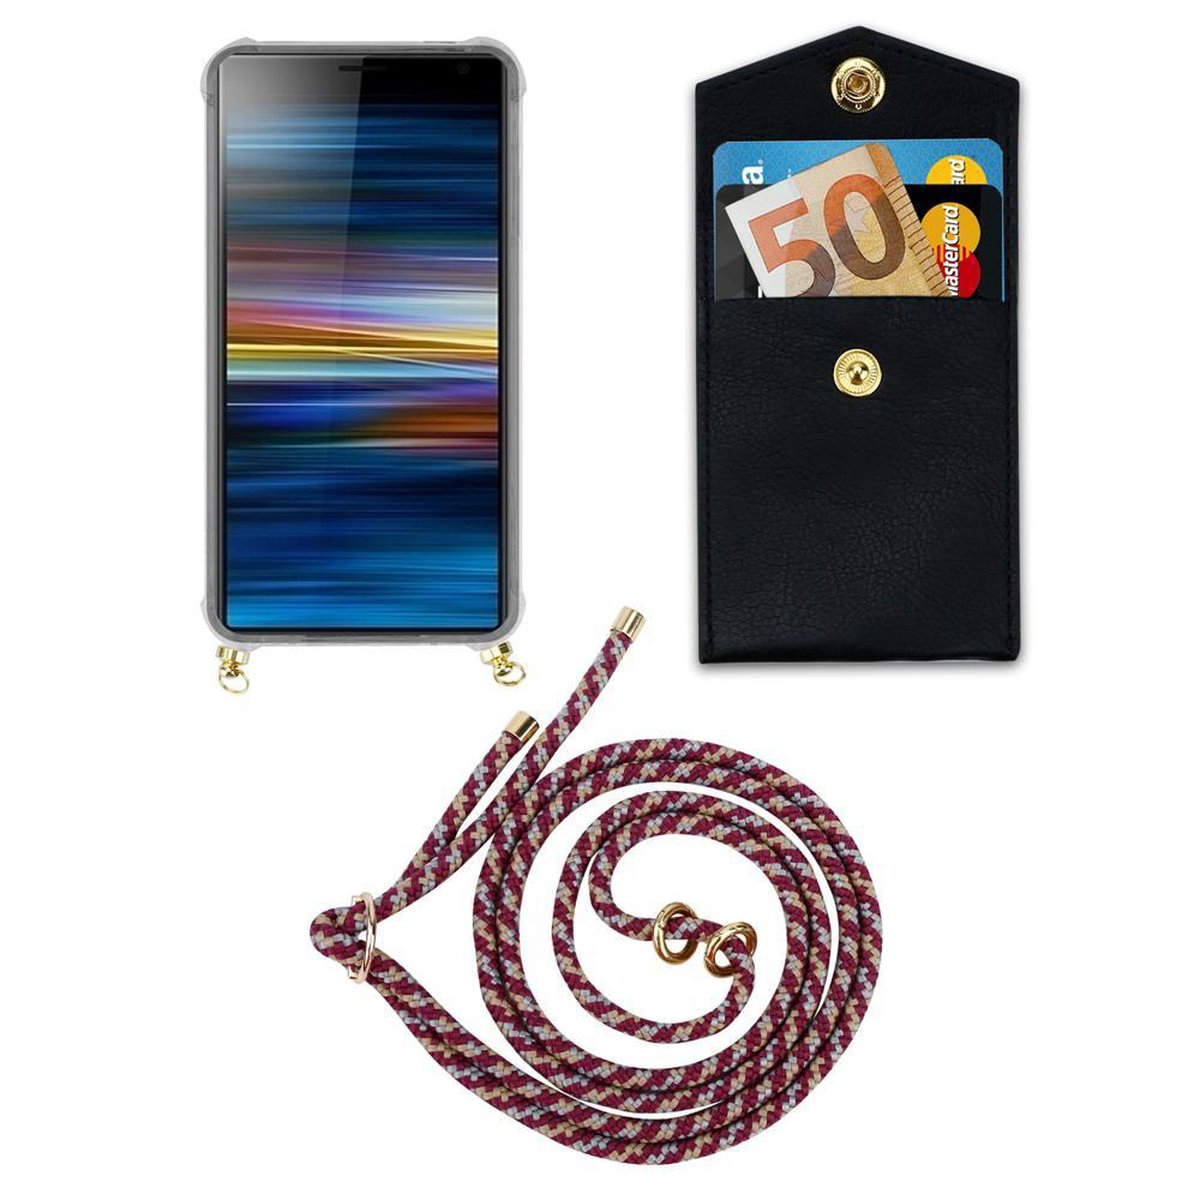 CADORABO Handy Kette mit Xperia Backcover, PLUS, Kordel Hülle, 10 Sony, ROT Band GELB Ringen, abnehmbarer WEIß und Gold